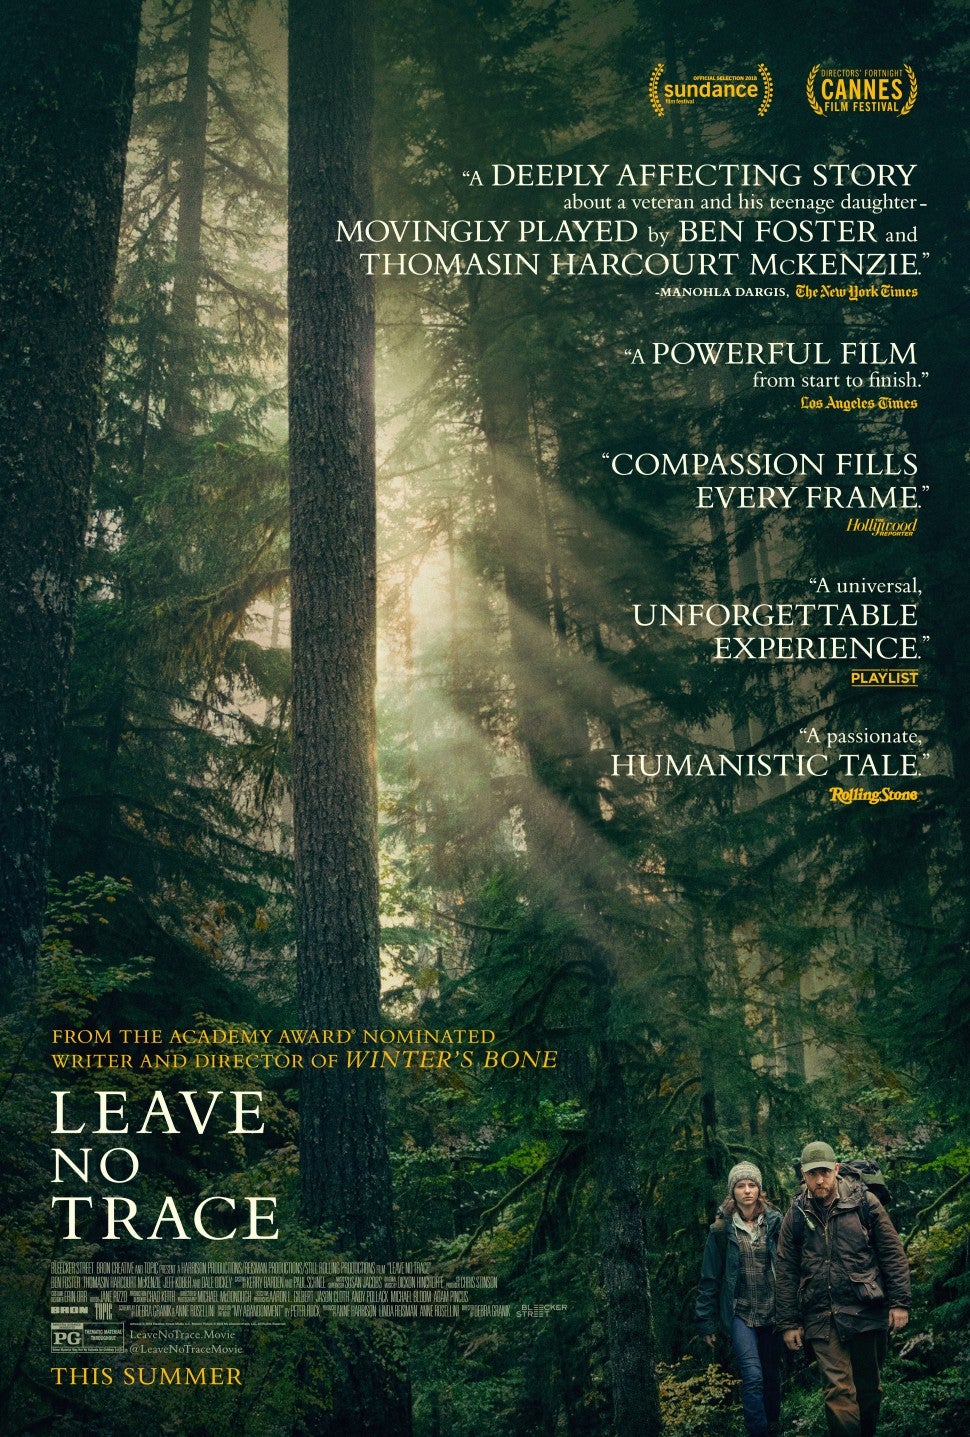 Leave No Trace, Ben Foster